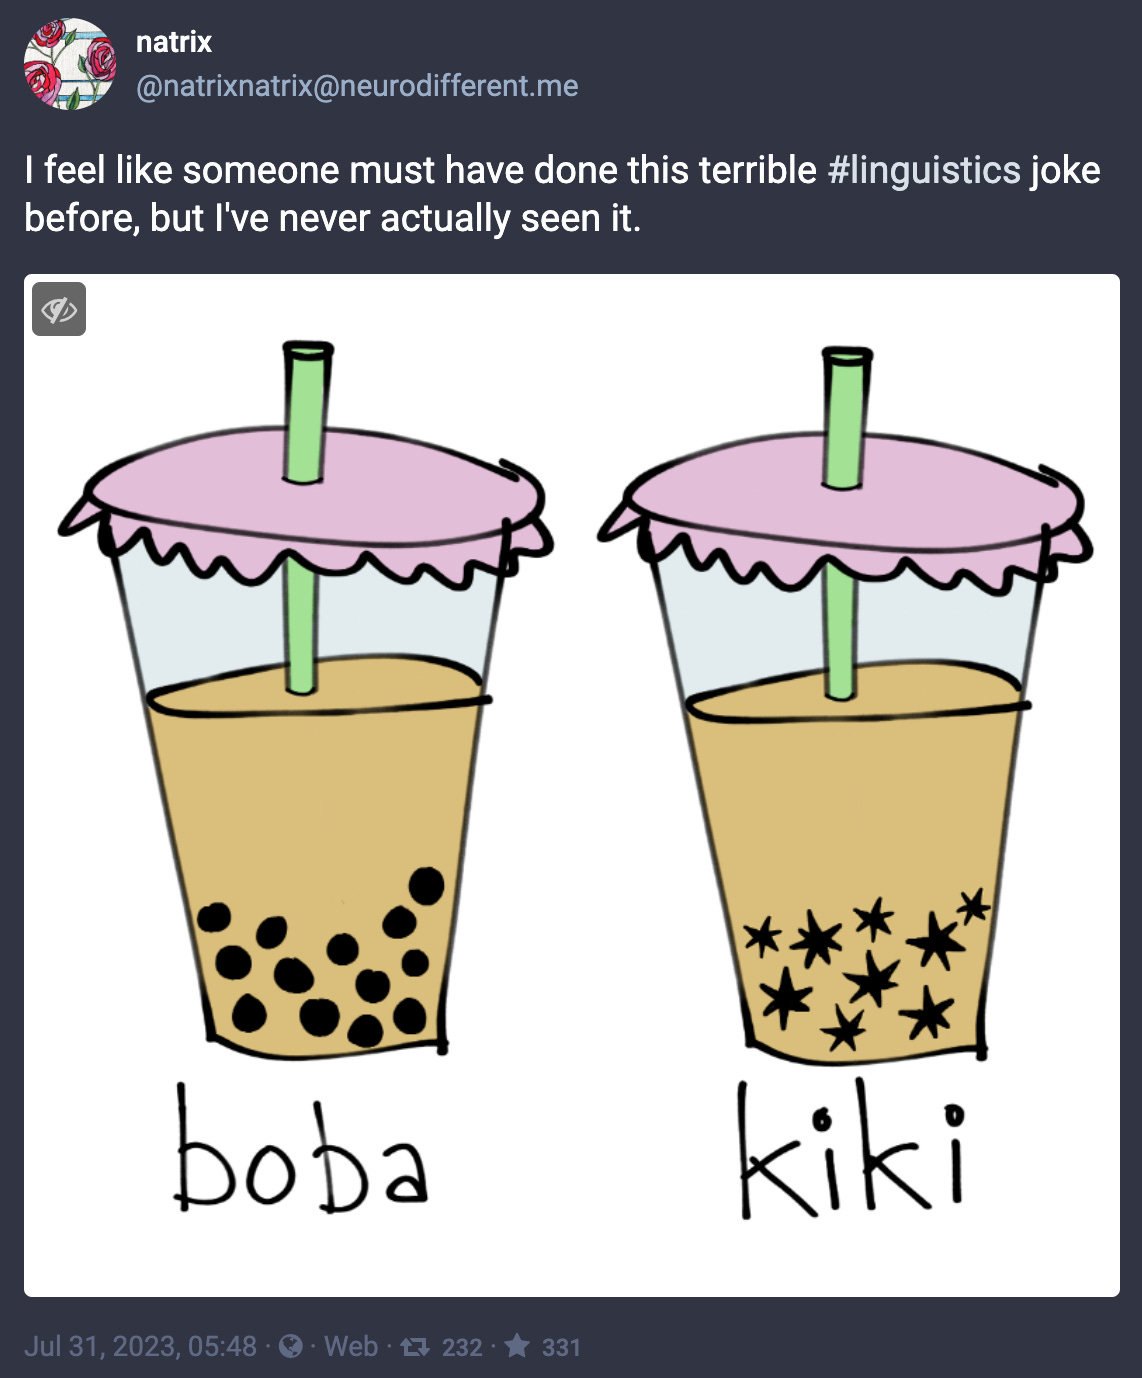 @natrixnatrix@neurodifferent.me posted “I feel like someone must have done this terrible #linguistics joke before, but I've never actually seen it,” with a cartoon of two cups of boba tea, the left one is labeled “boba” and looks normal. In the right one the boba balls are all spiky, and it’s labeled “kiki.”